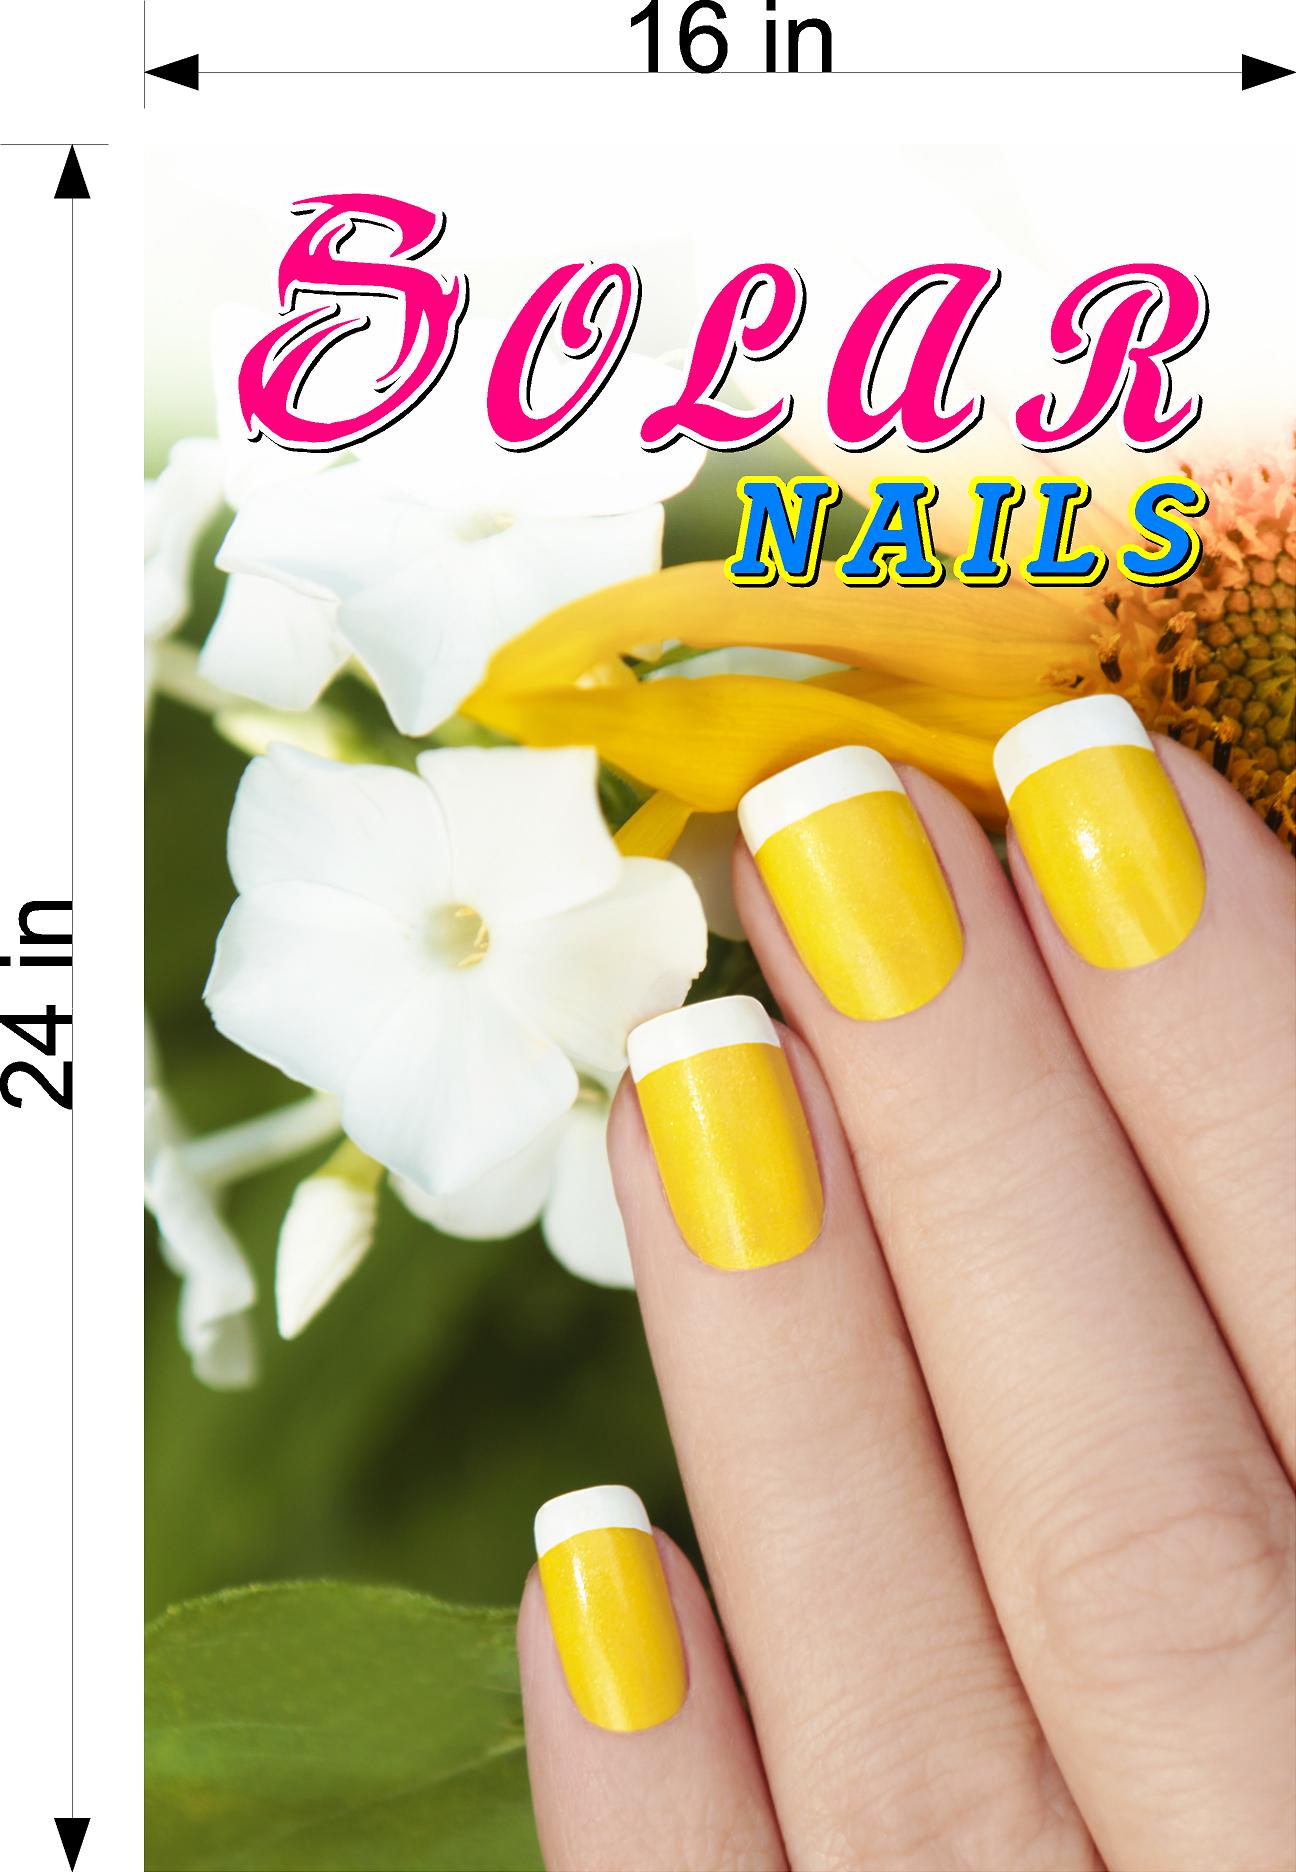 Solar 04 Wallpaper Fabric Poster Decal with Adhesive Backing Wall Sticker Decor Nail Salon Sign Vertical